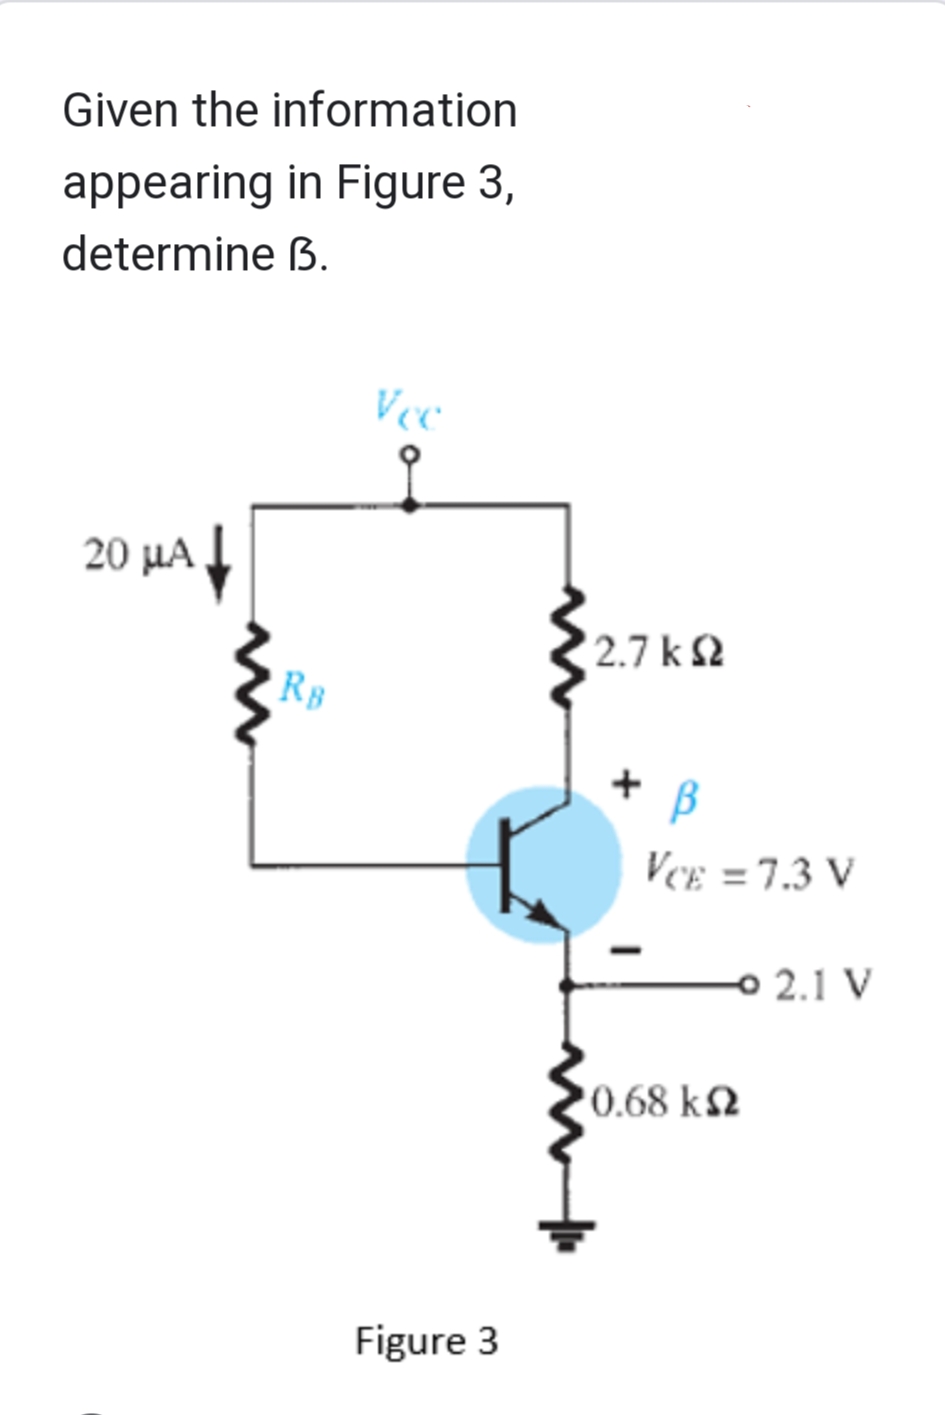 Given the information
appearing in Figure 3,
determine B.
↓
20 μA
RB
Vec
Figure 3
'27 ΚΩ
+ B
VCE = 7.3 V
-2.1 V
10.68 ΚΩ